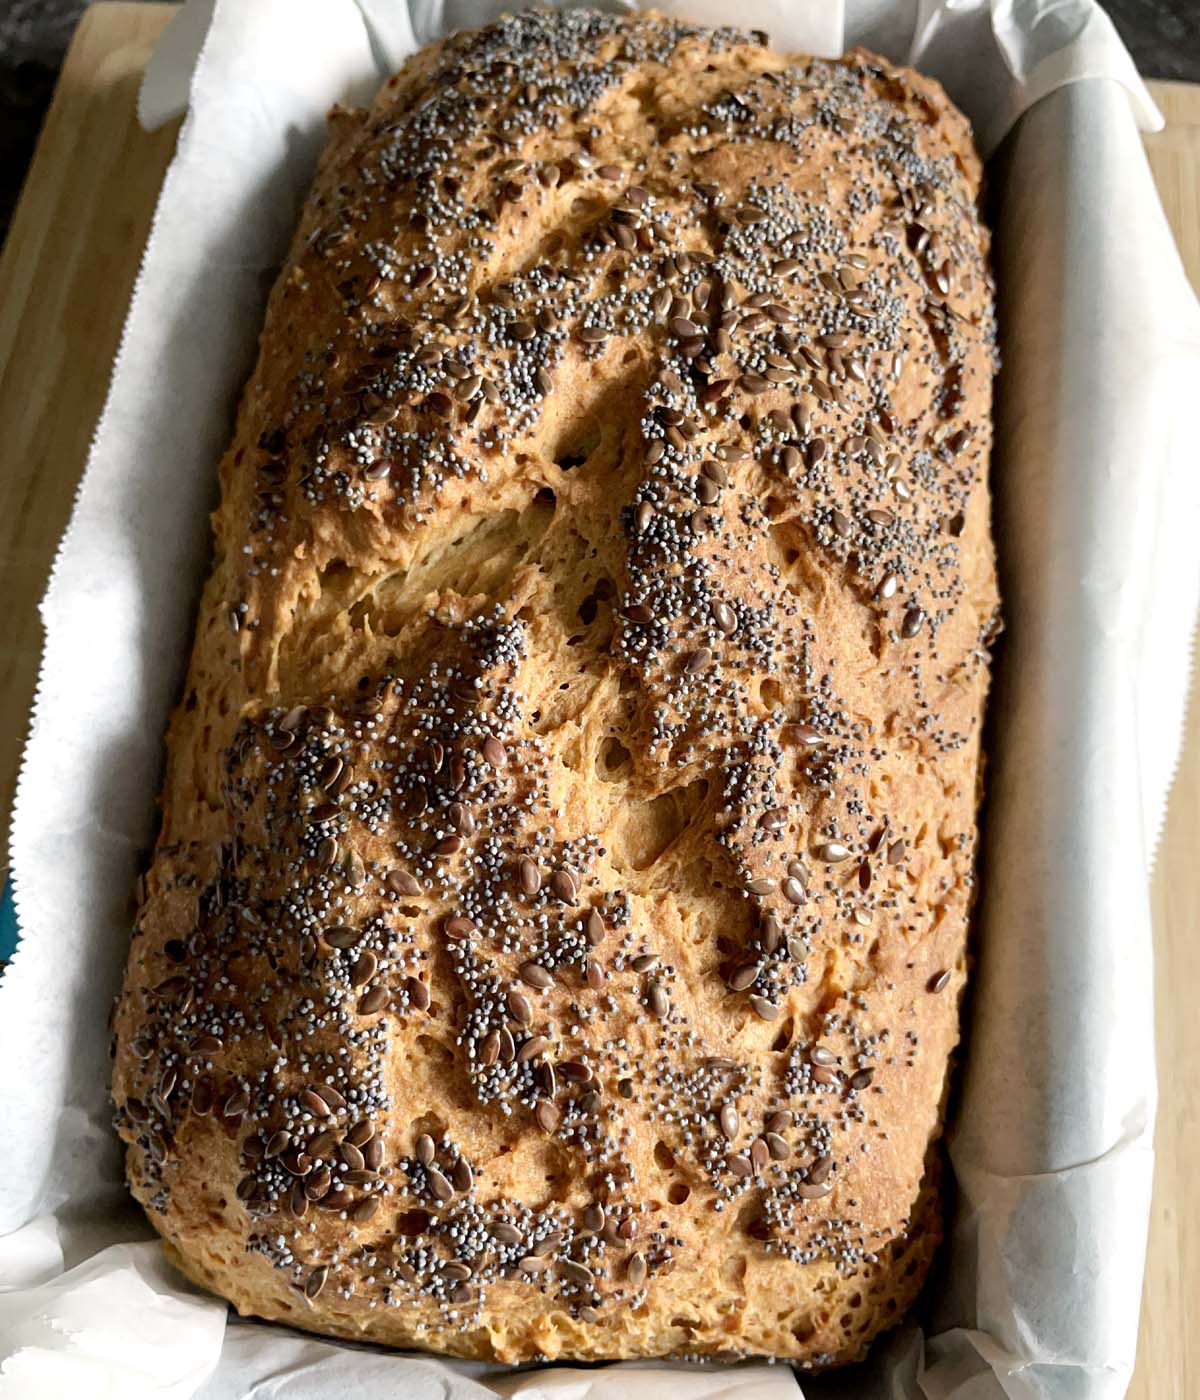 A brown loaf of bread topped with flax seeds and poppy seeds, in a paper lined baking pan.